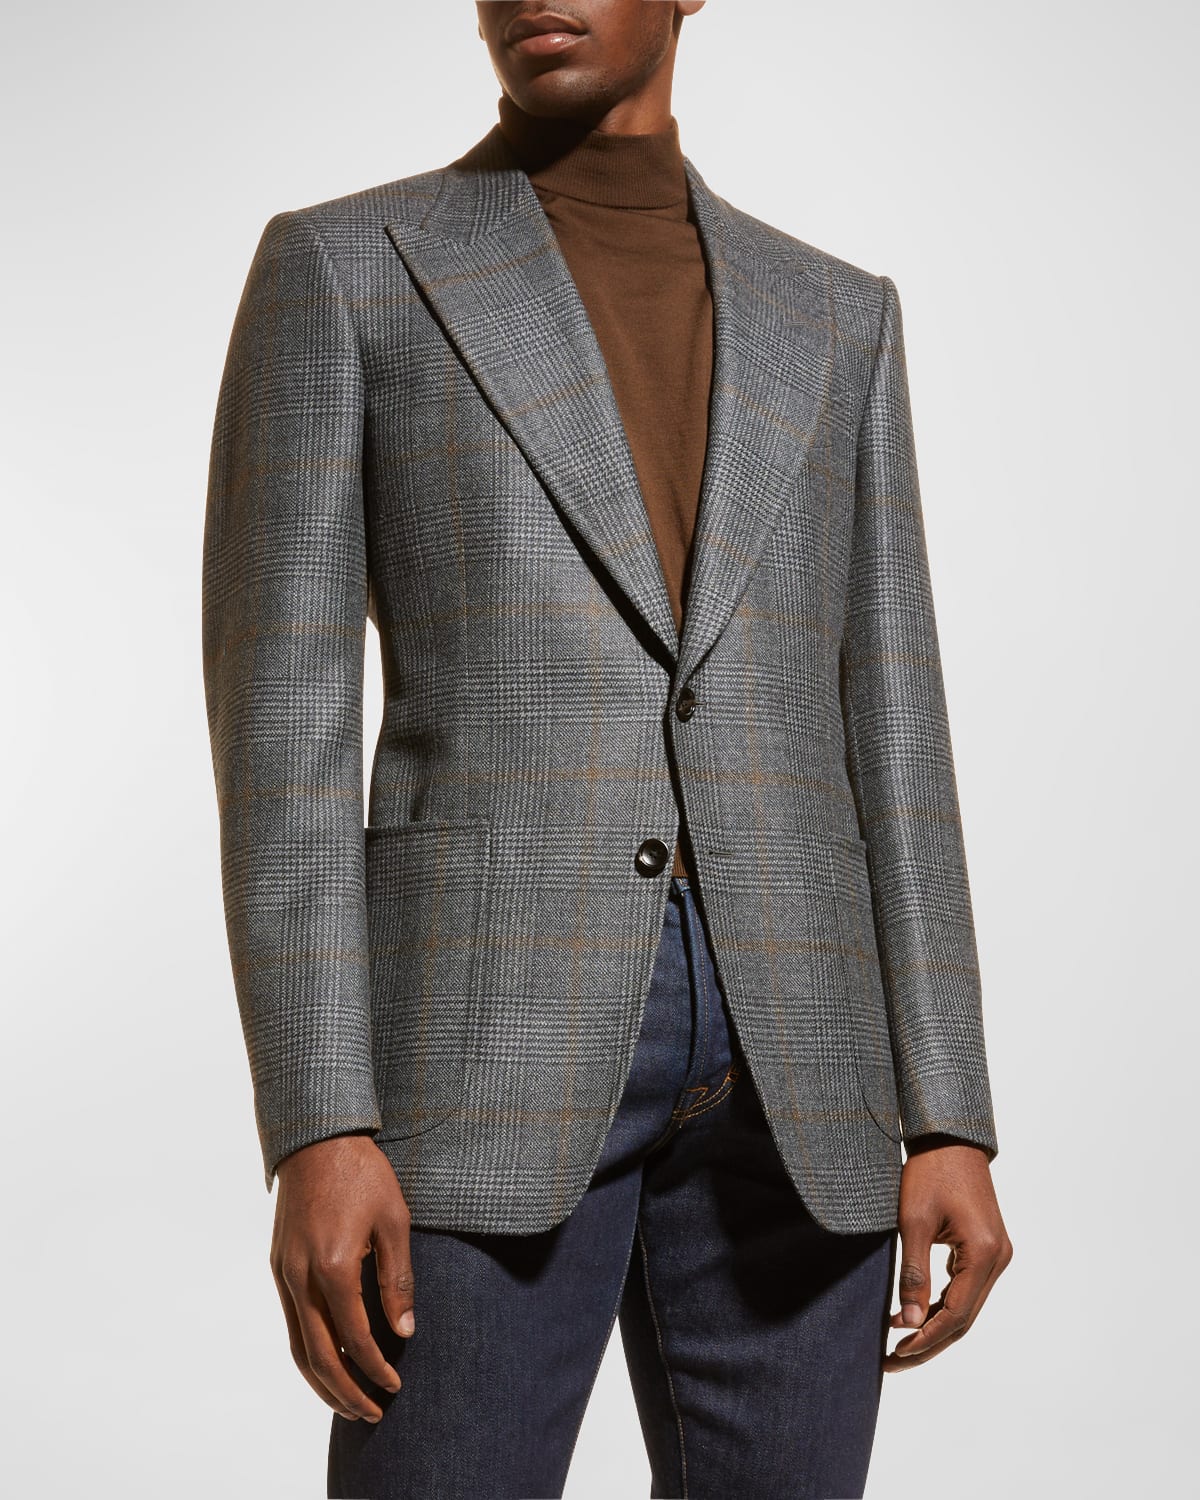 Tom Ford Jacket | Neiman Marcus